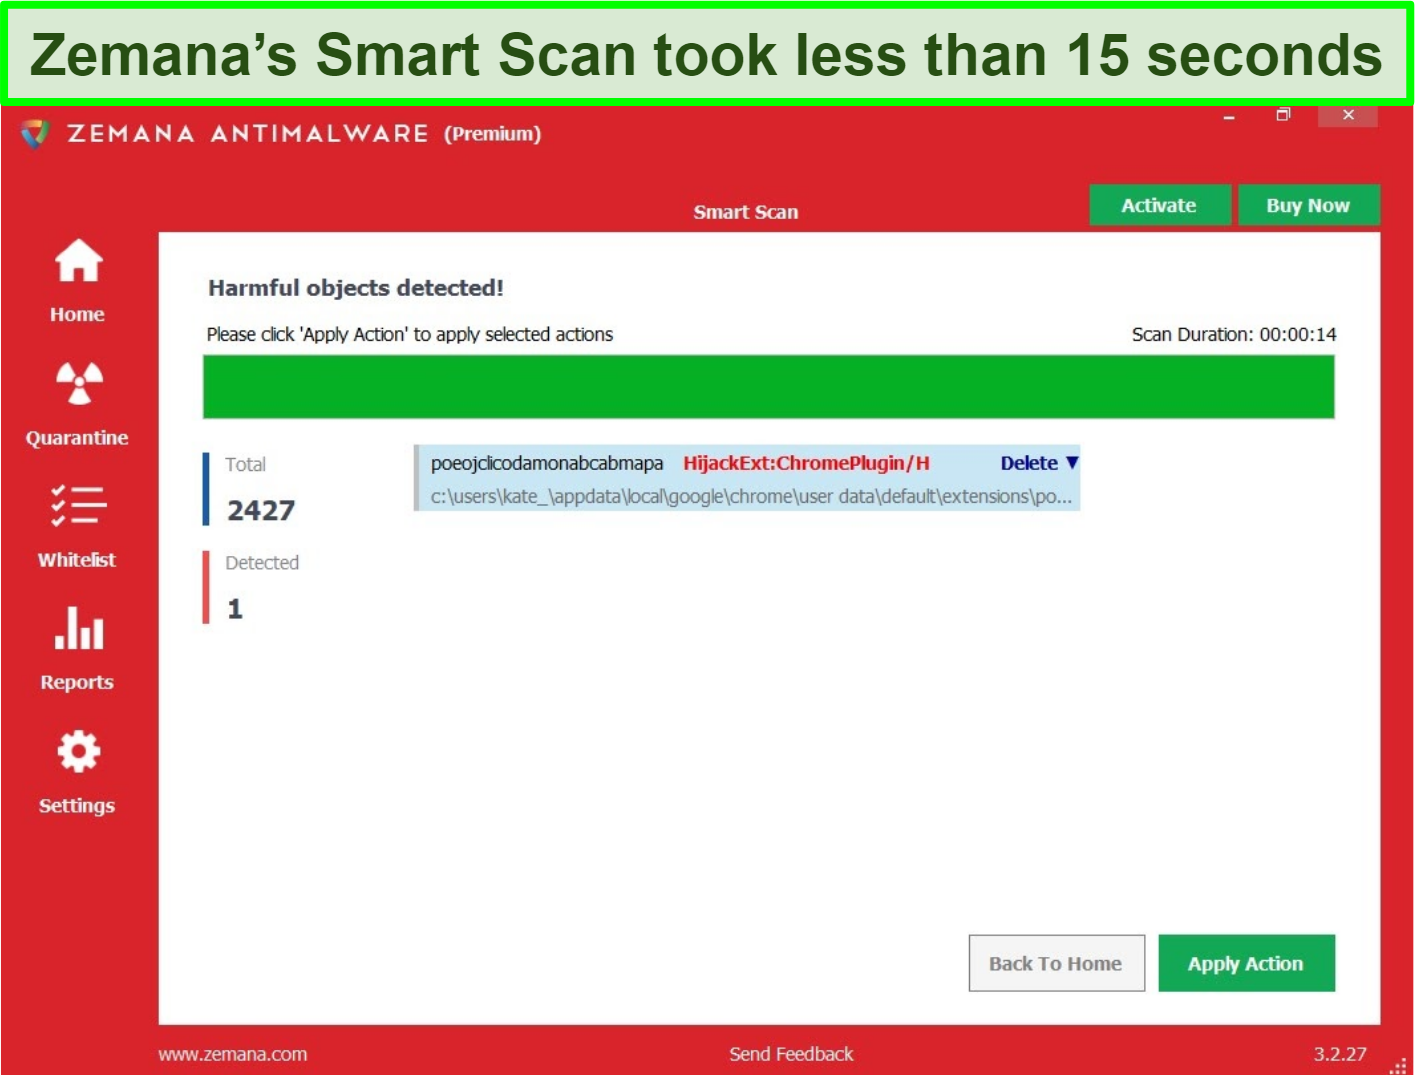  Screenshot of Zemana's Smart Scan with harmful objects detected.